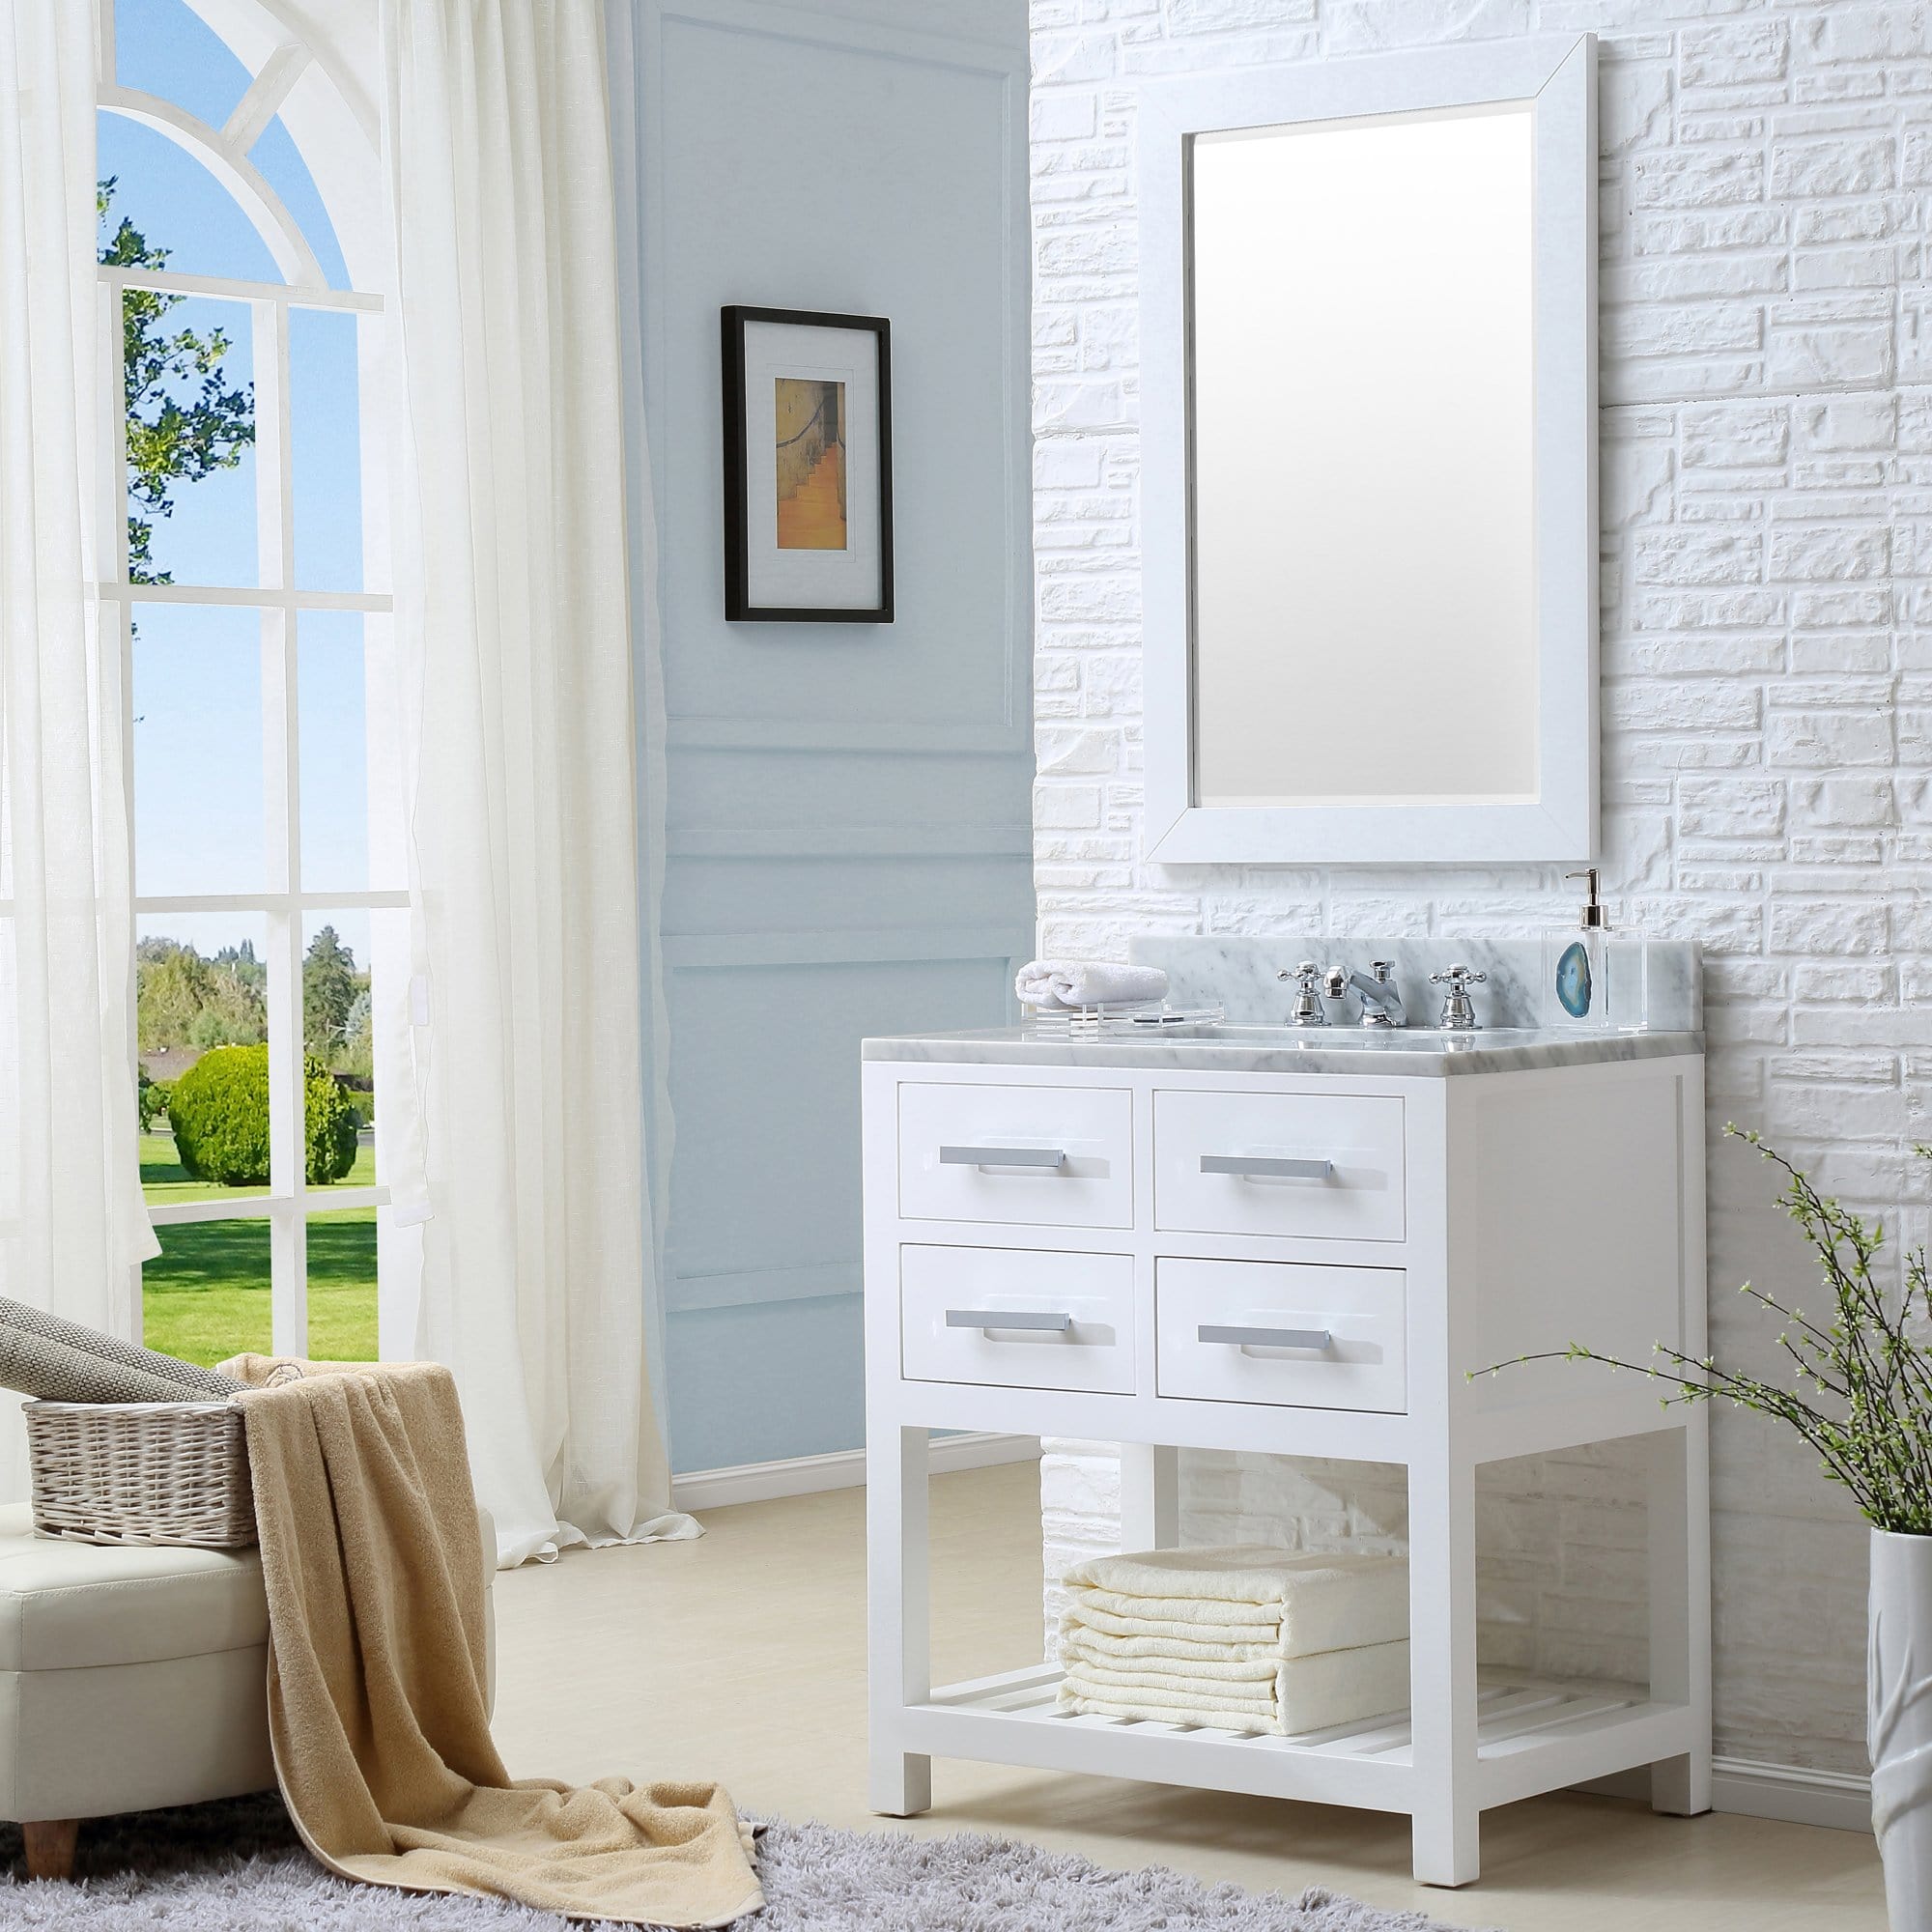 Water Creation 30 Inch Pure White Single Sink Bathroom Vanity With Matching Framed Mirror And Faucet From The Madalyn Collection - Molaix700621683582Bathroom vanityMA30CW01PW-R24BX0901